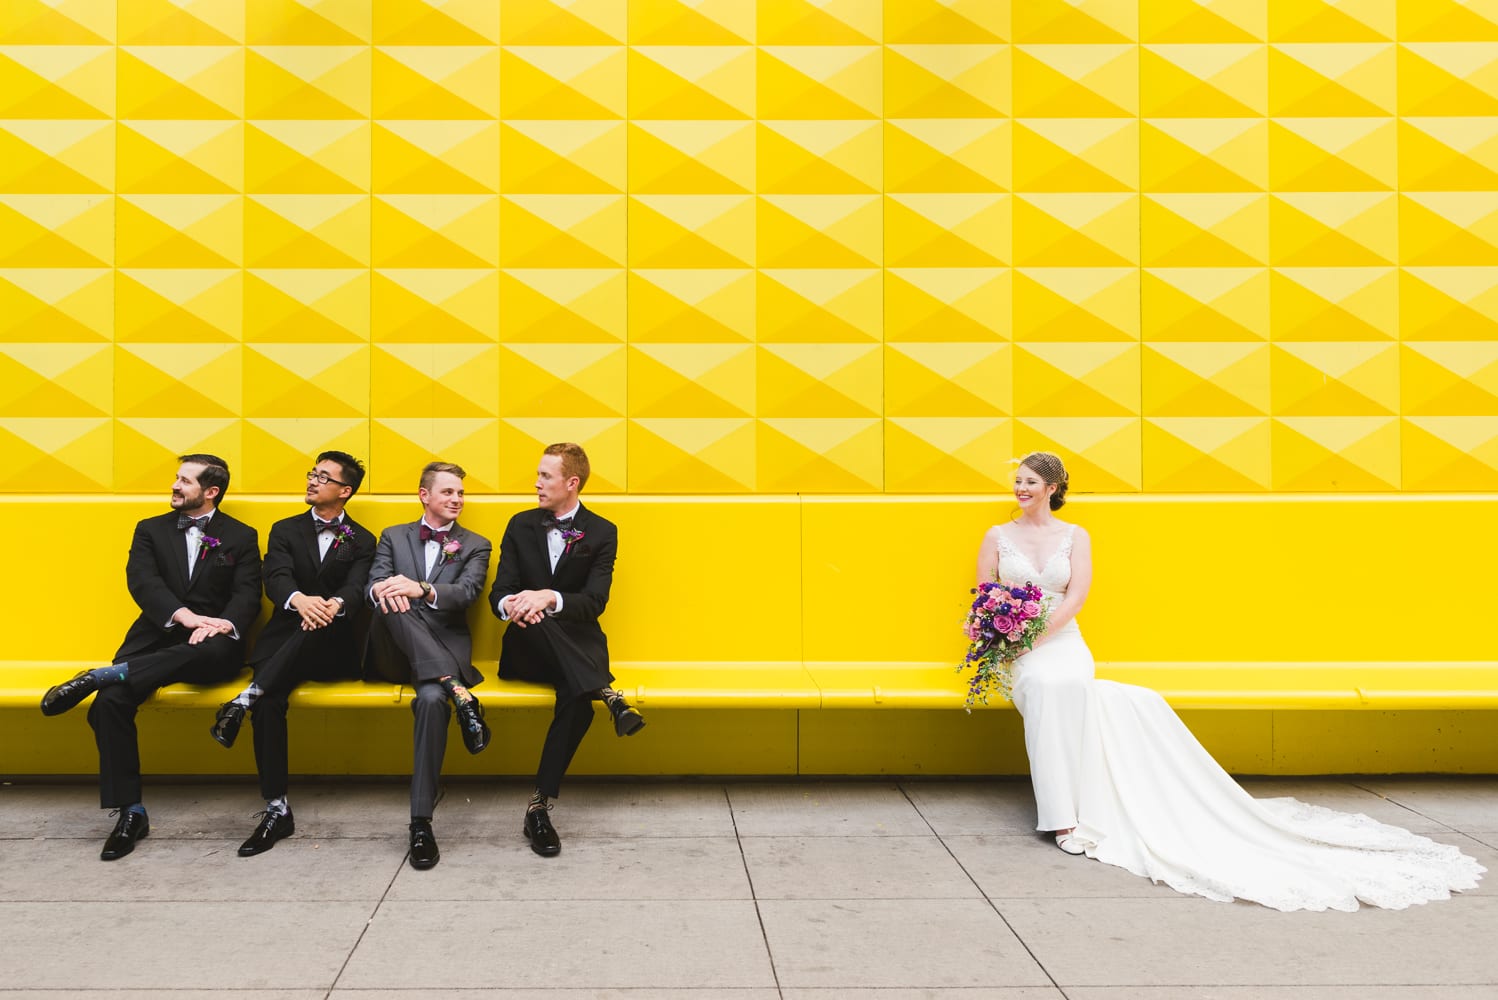 Rooftop Wedding in Downtown Denver | Wedding Photography | Denver, CO | From The Hip Photo